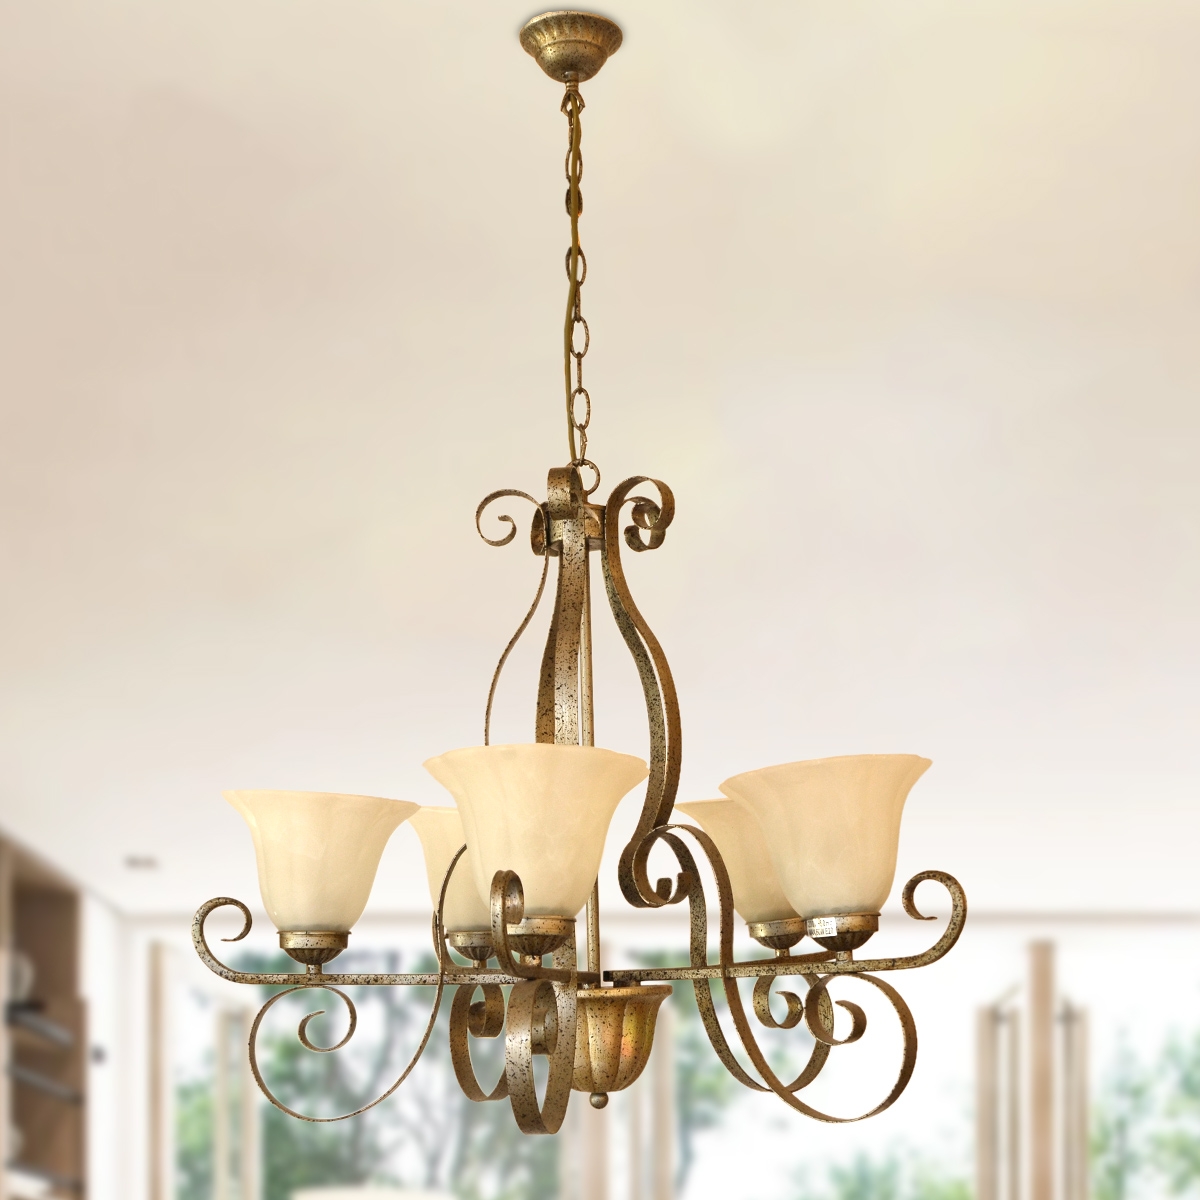 Uplight Chandelier 5Arms HLH-24108 -Brown